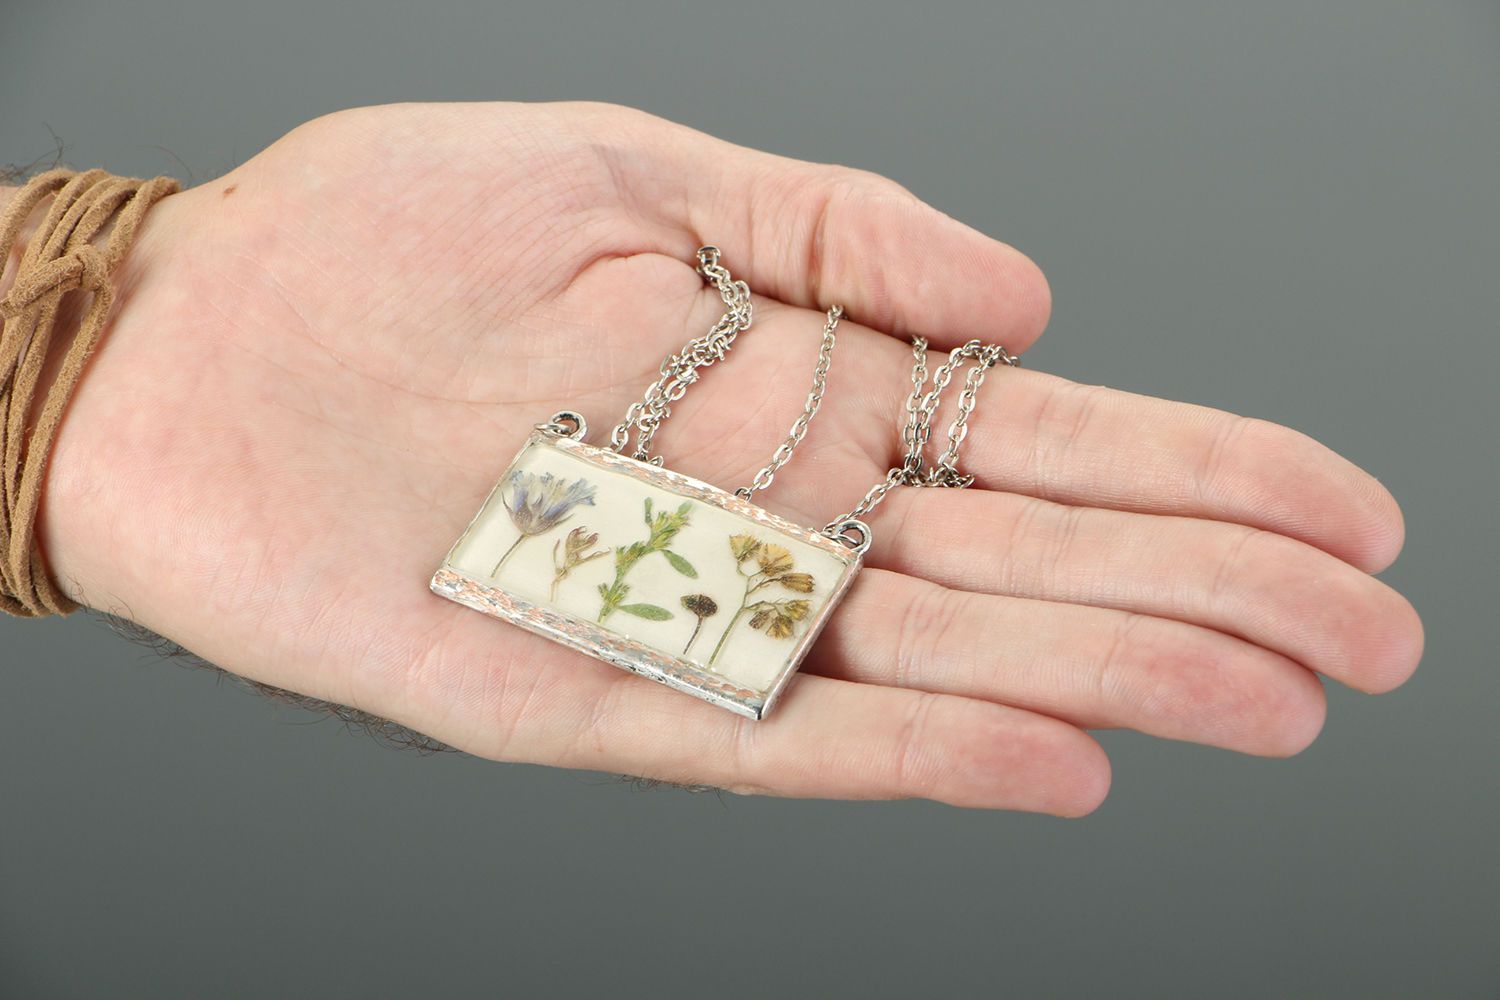 Necklace made of flowers, coated with epoxy resin photo 4